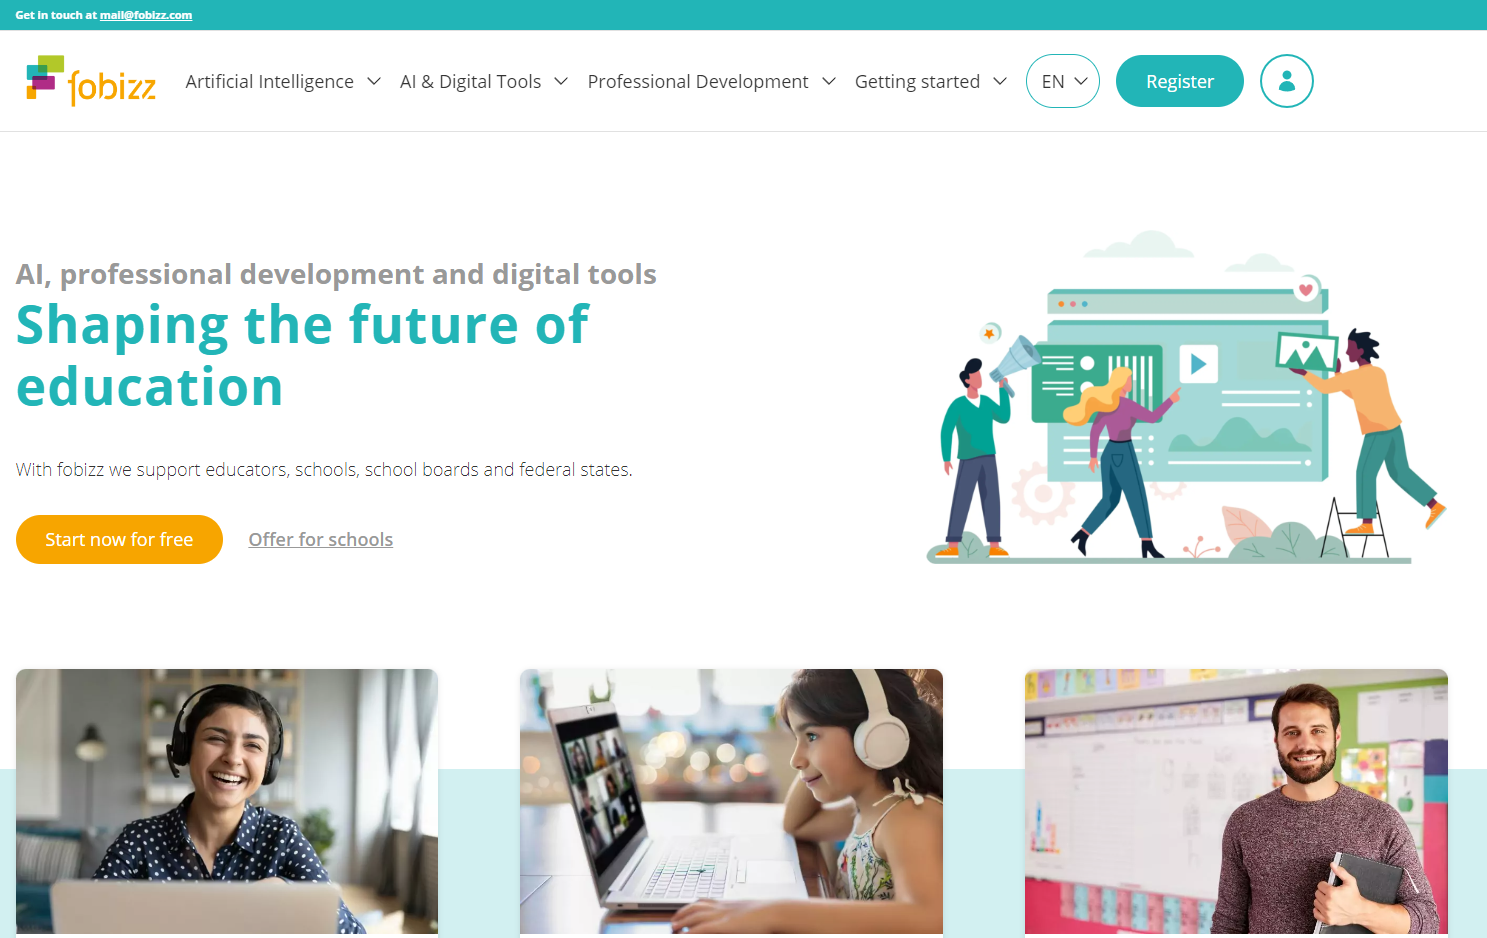 Fobizz is an AI-driven platform that provides personalized learning paths for students